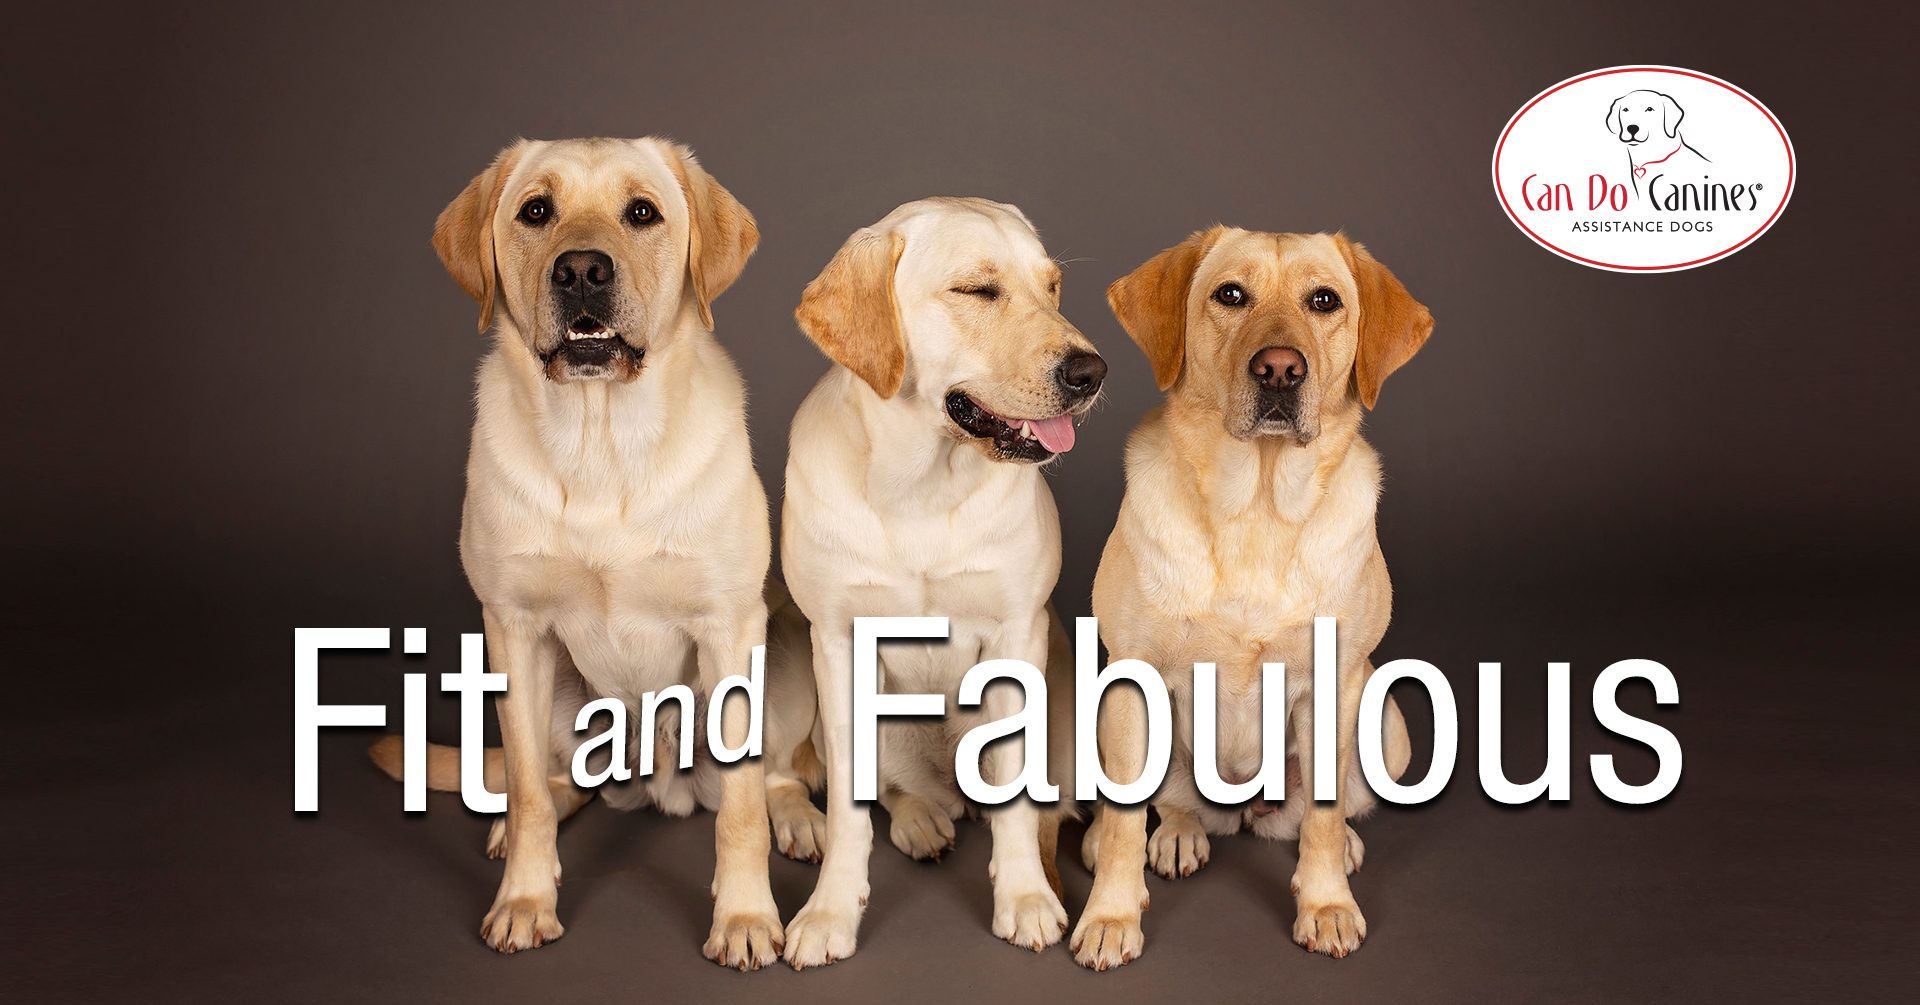 three yellow labs sitting with the words "Fit and Fabulous" over the image